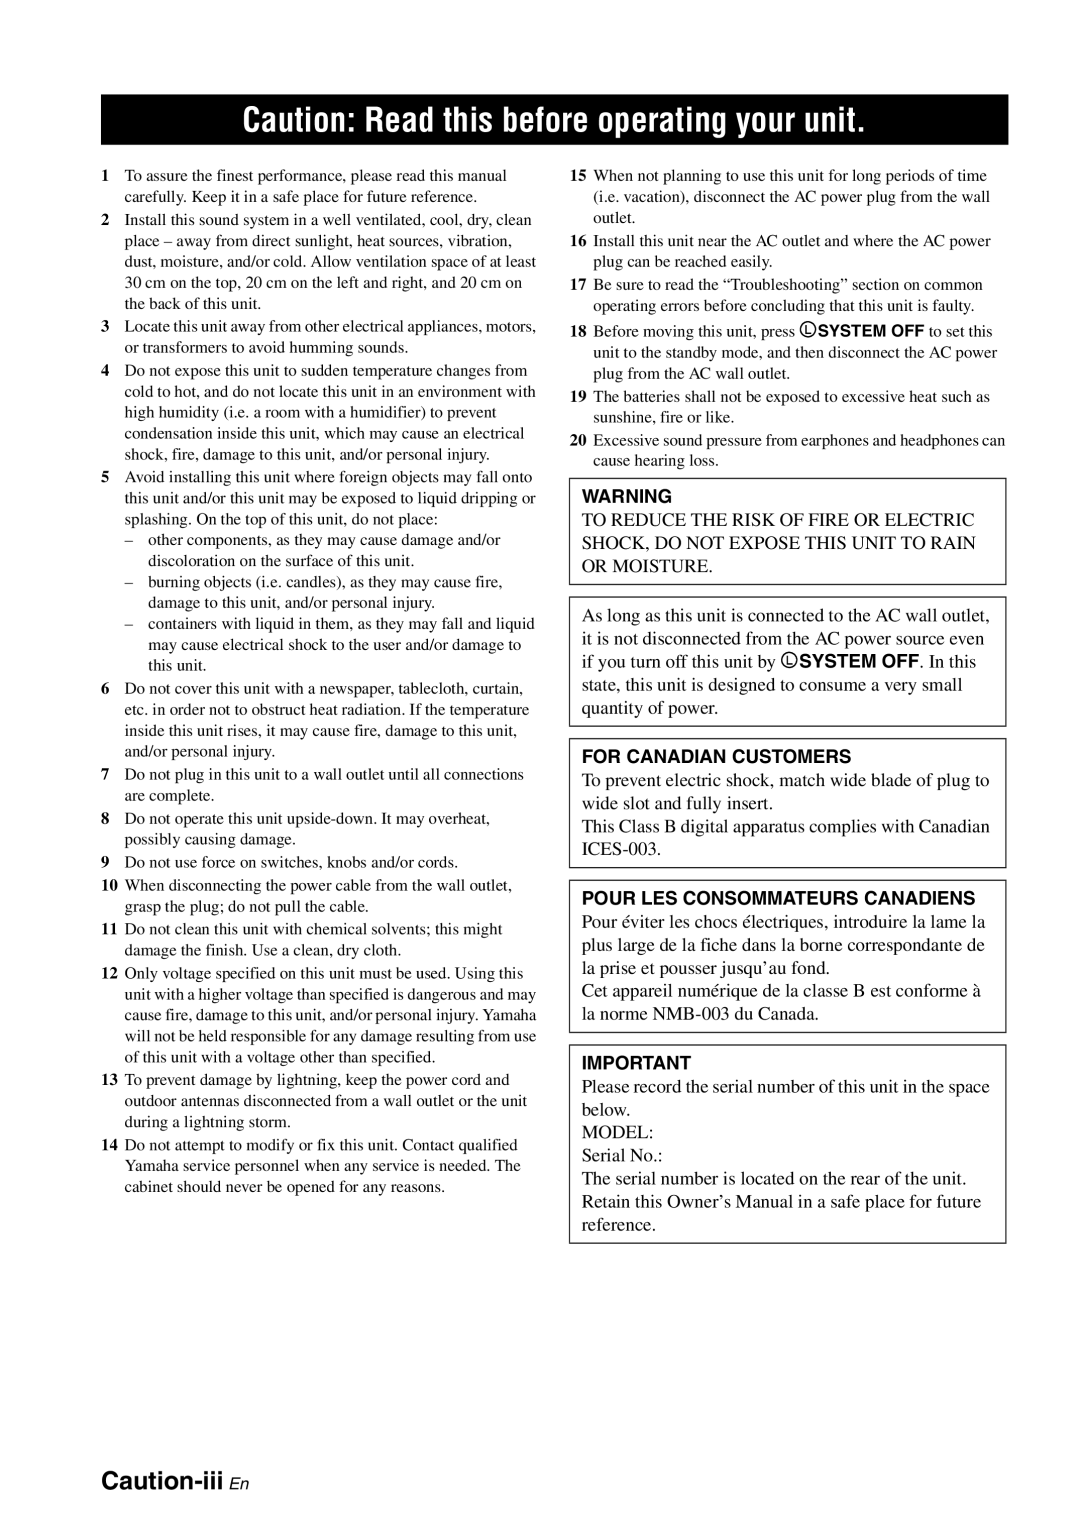 Yamaha HTR-6180 owner manual Caution: Read this before operating your unit, Caution-iii En 